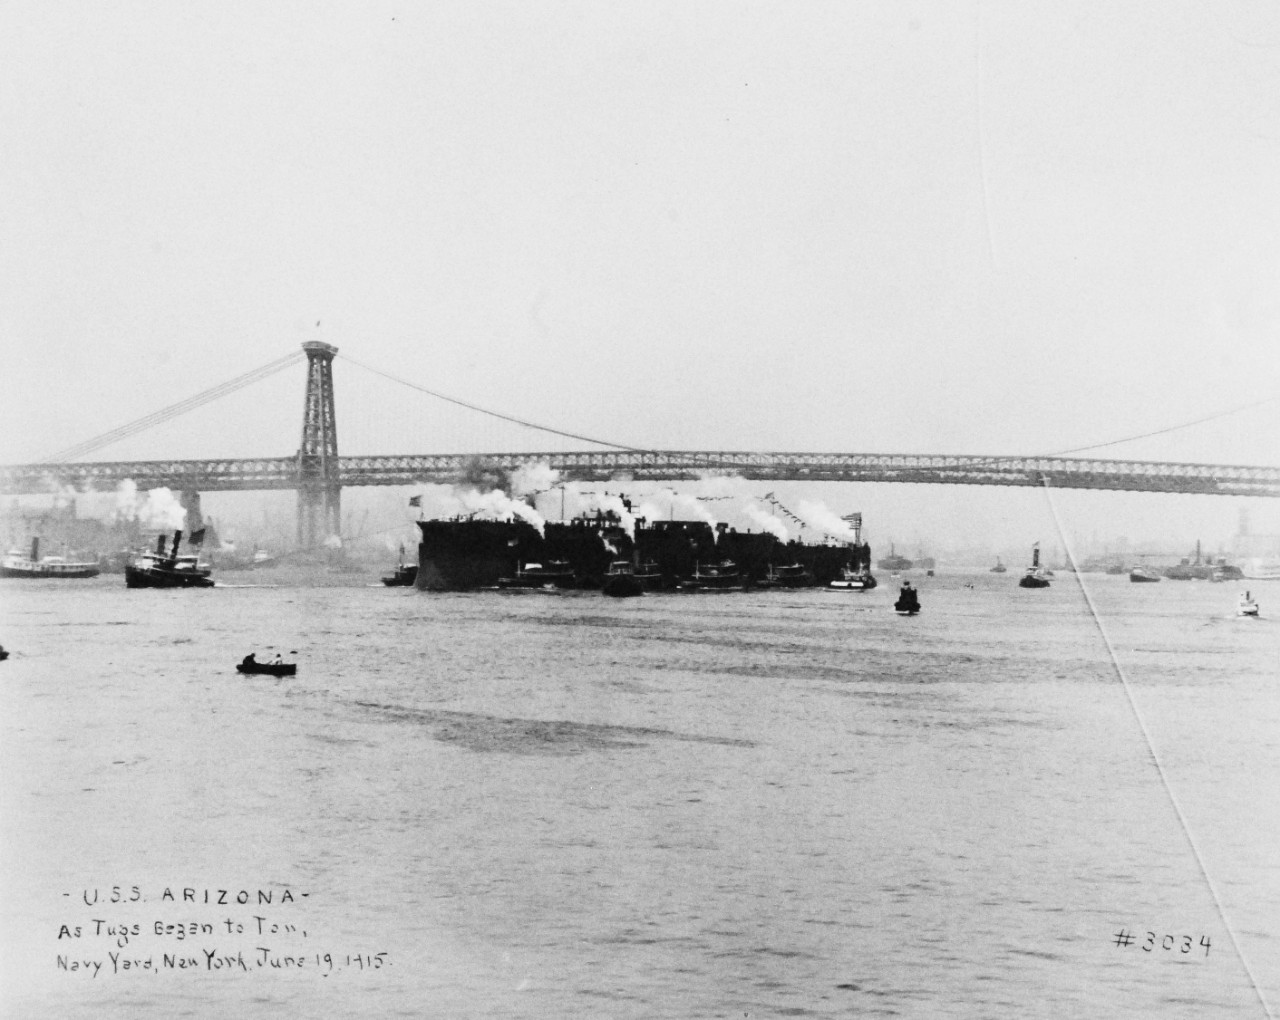 <p>19-LC-19A-10: USS Arizona (BB 39) as tugs begin to tow after christening and launching at the New York Navy Yard, New York City, June 19, 1915.&nbsp;</p>
